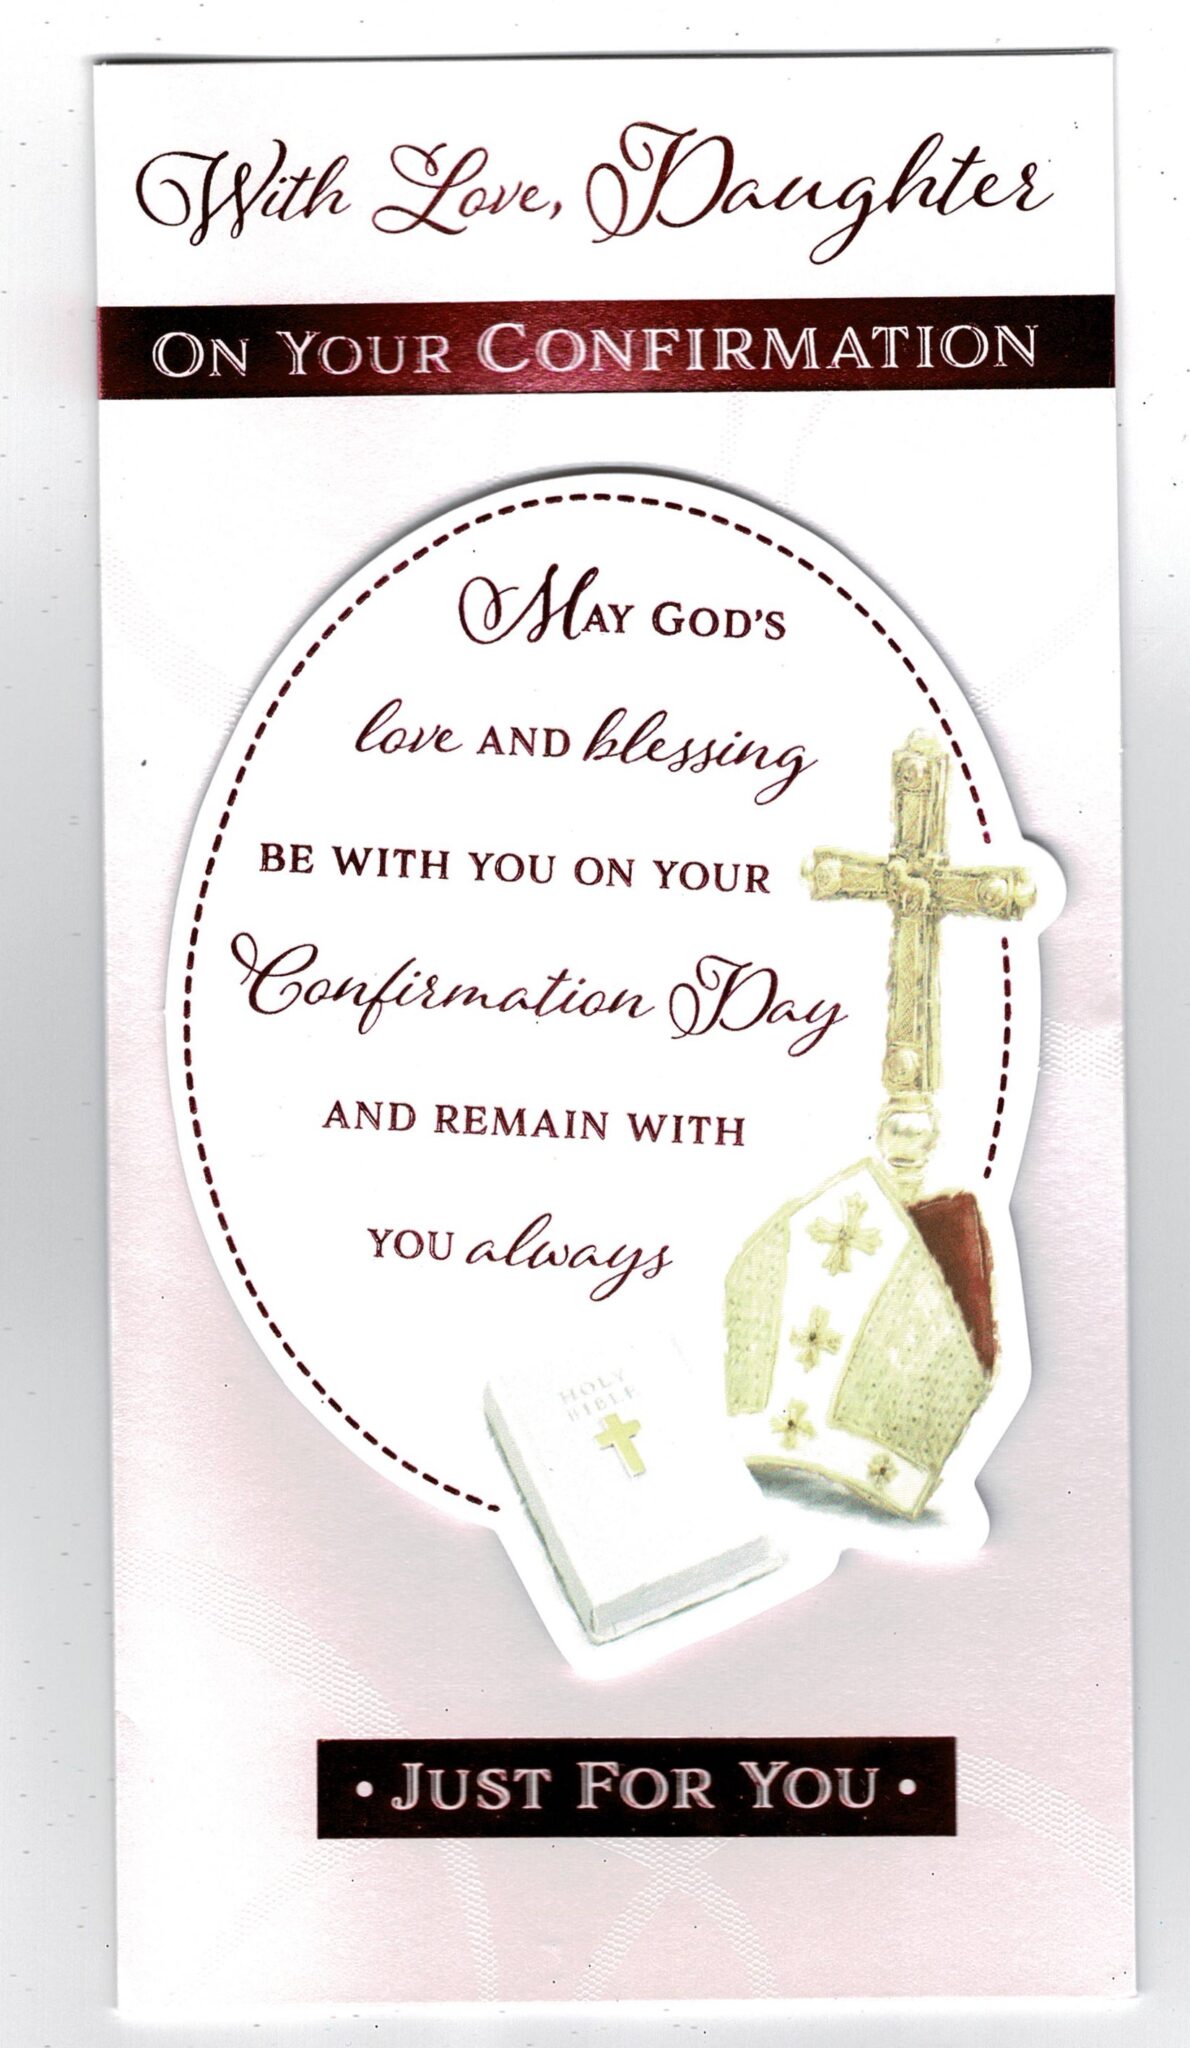 Daughter Confirmation Card ‘With Love Daughter, On Your Confirmation